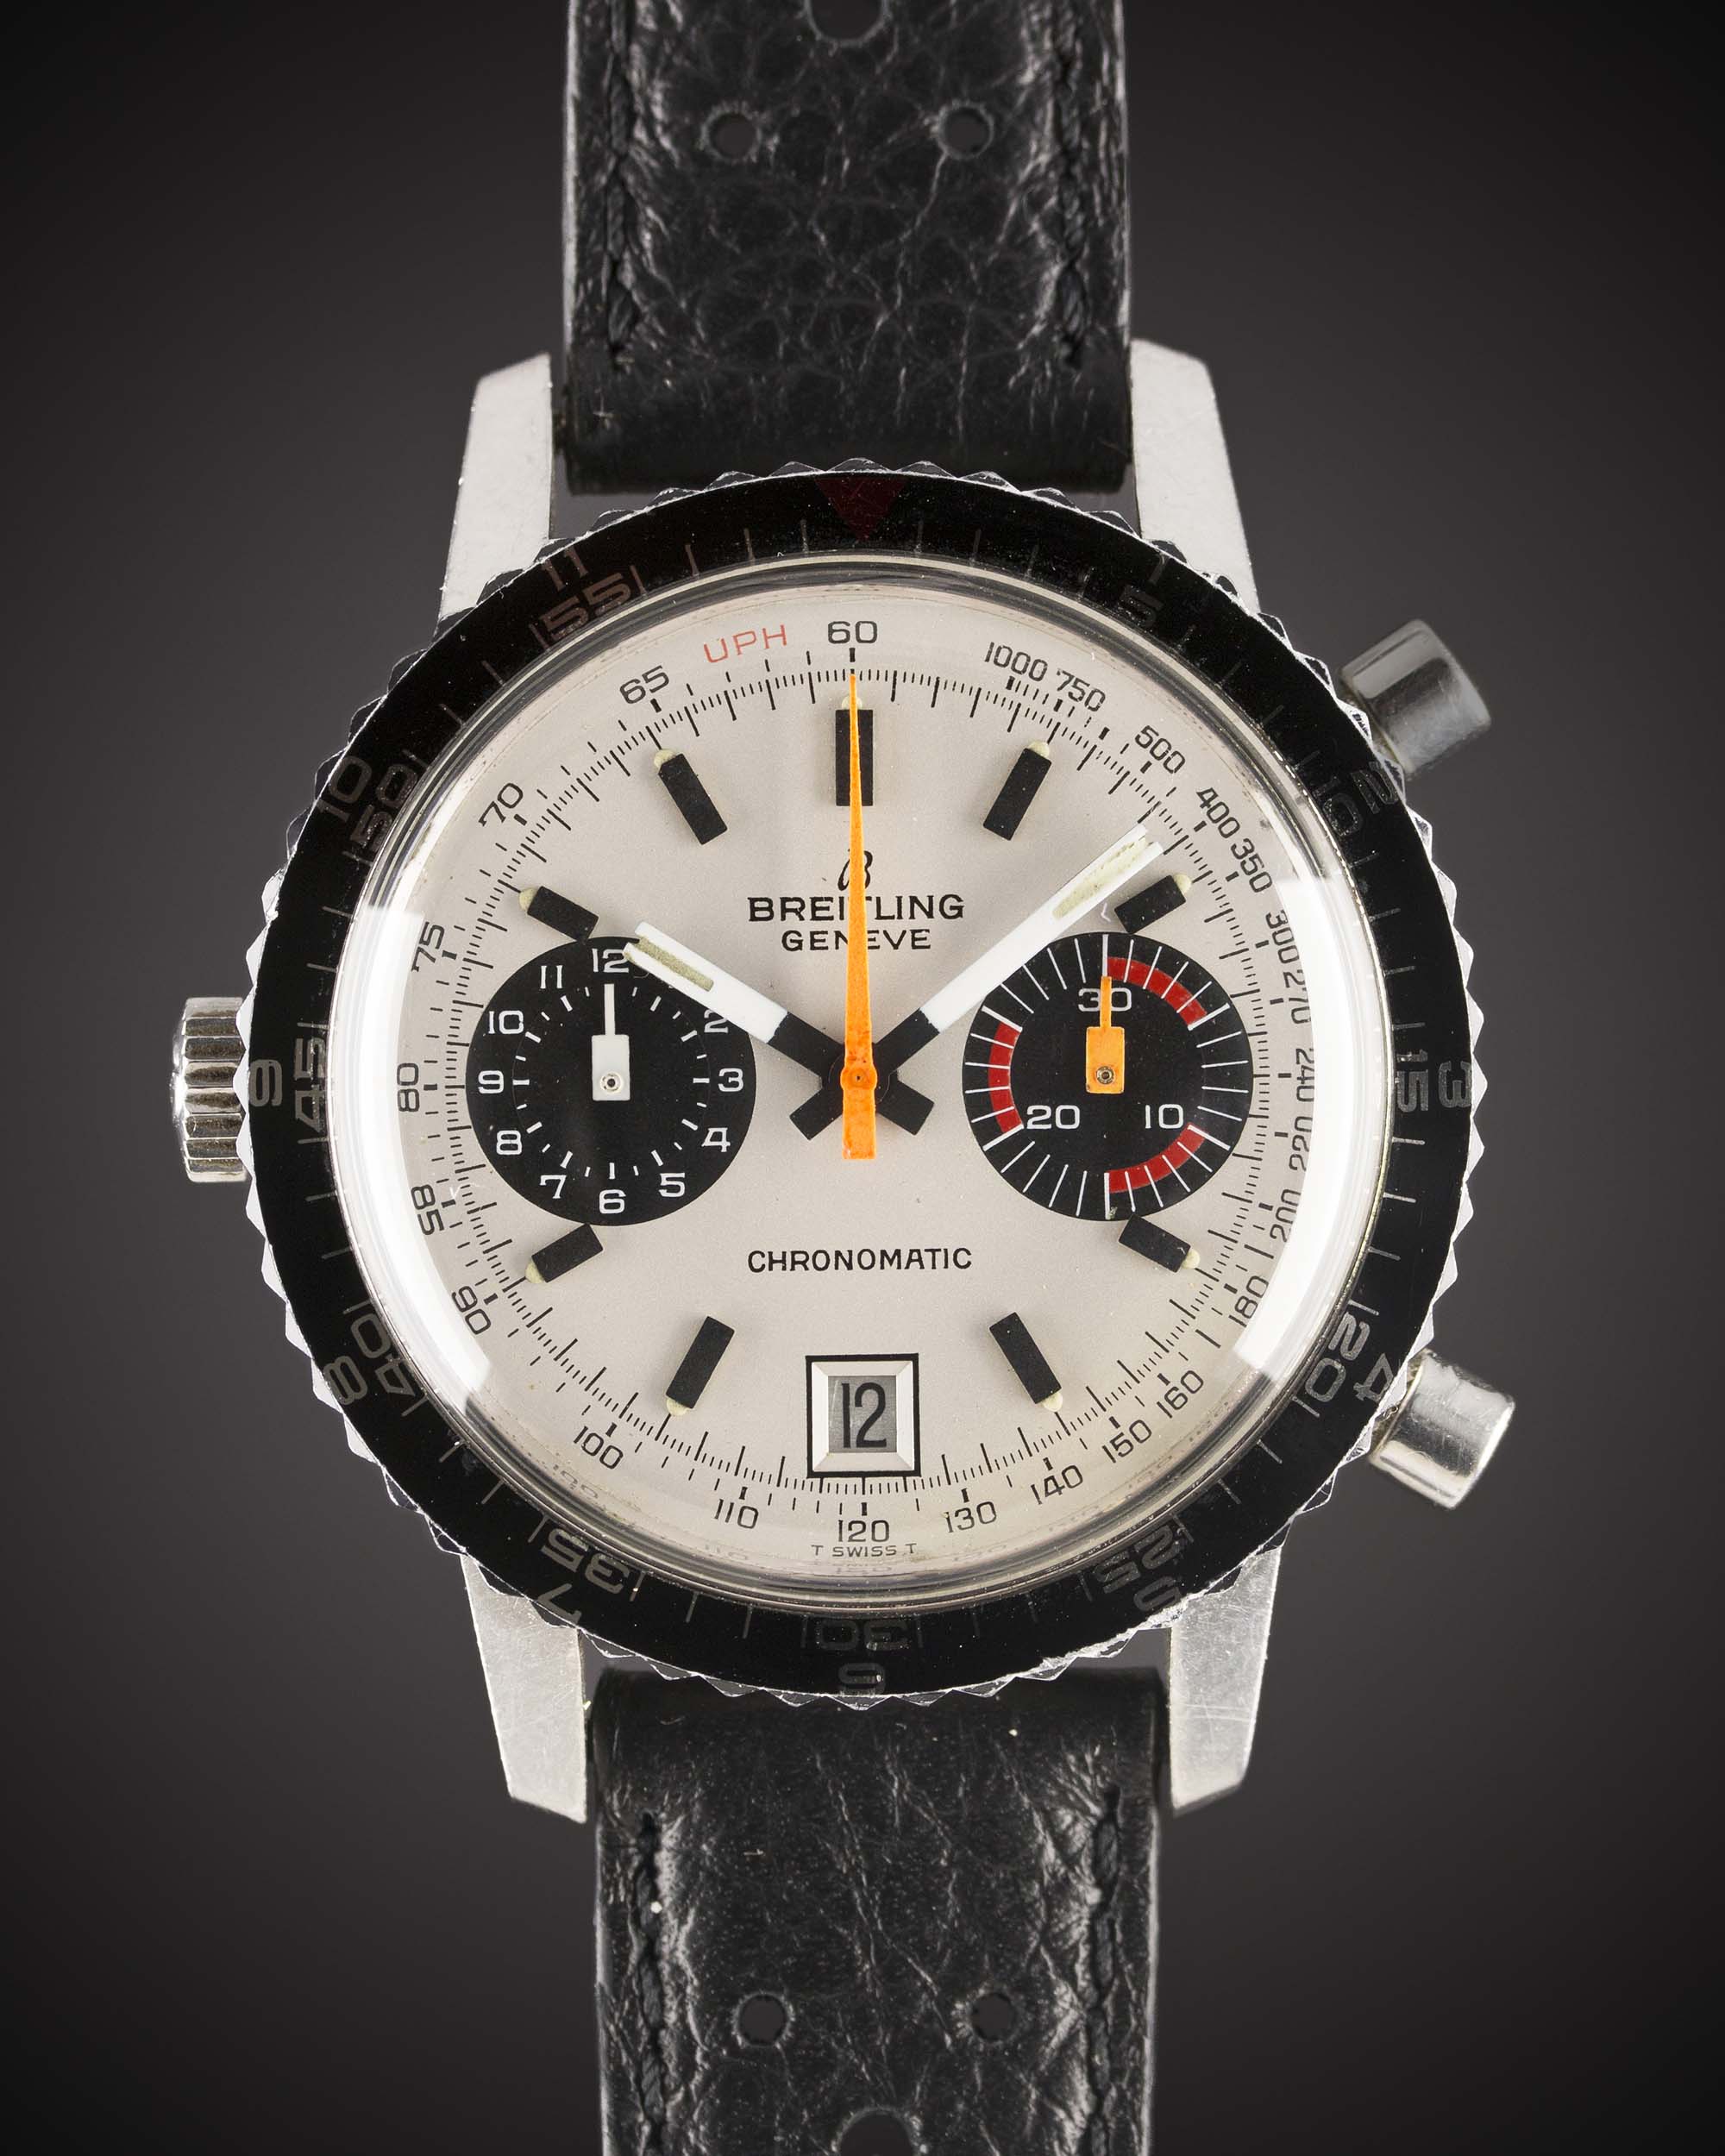 A GENTLEMAN'S STAINLESS STEEL BREITLING CHRONOMATIC CHRONOGRAPH WRIST WATCH DATED 1970, REF. 2110 - Image 2 of 2